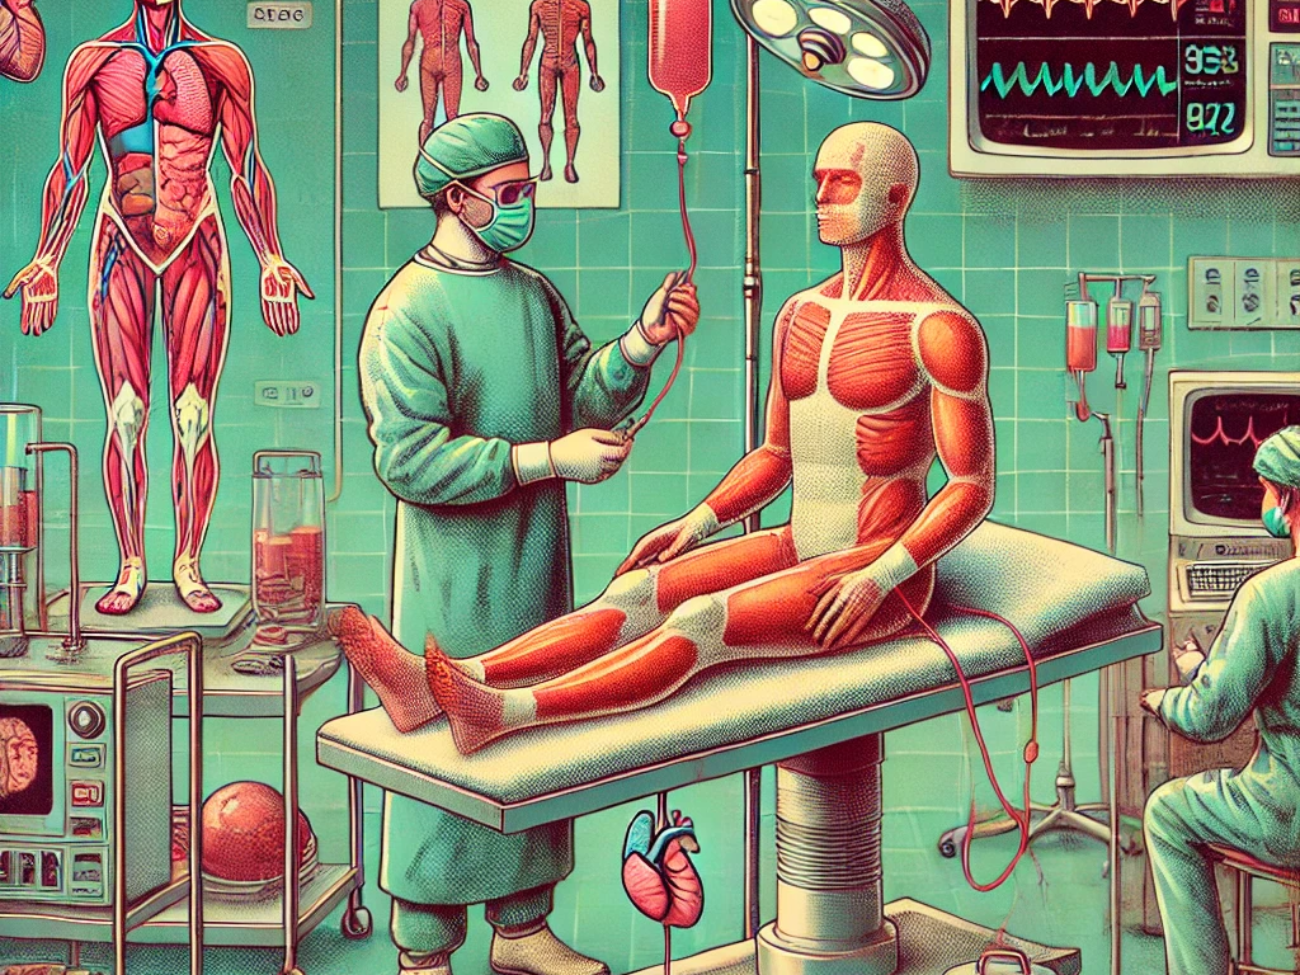 DALL·E 2024-06-27 17.36.09 - A 1980s-themed illustration of a medical facility where bioprinted body parts are being prepared for transplantation. The scene shows doctors and tech